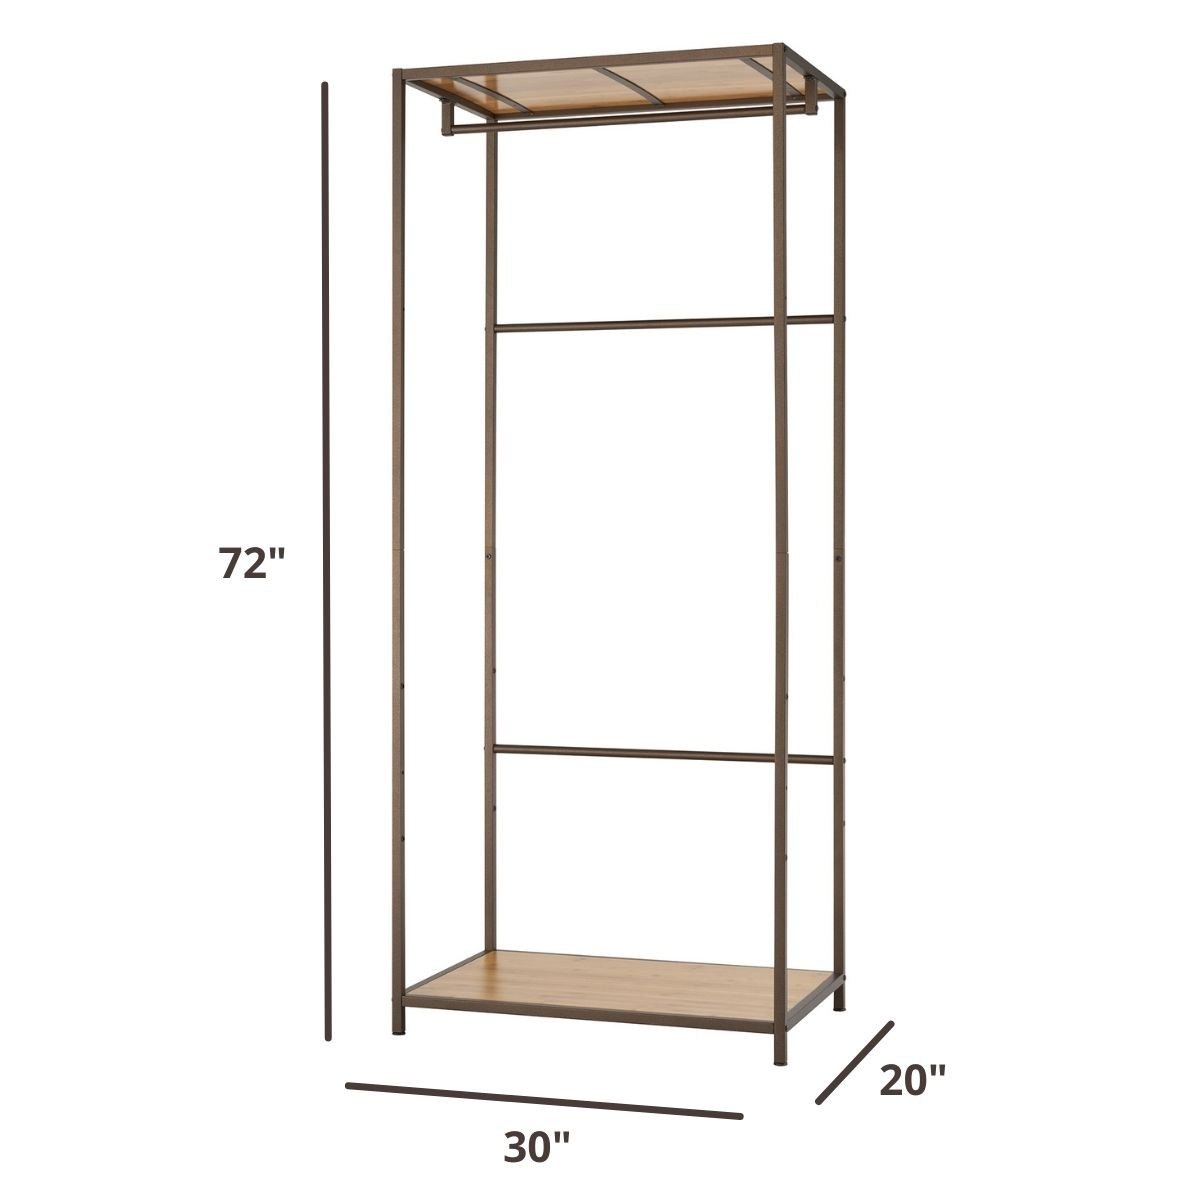 72 inches tall by 30 inches wide by 20 inches deep garment rack